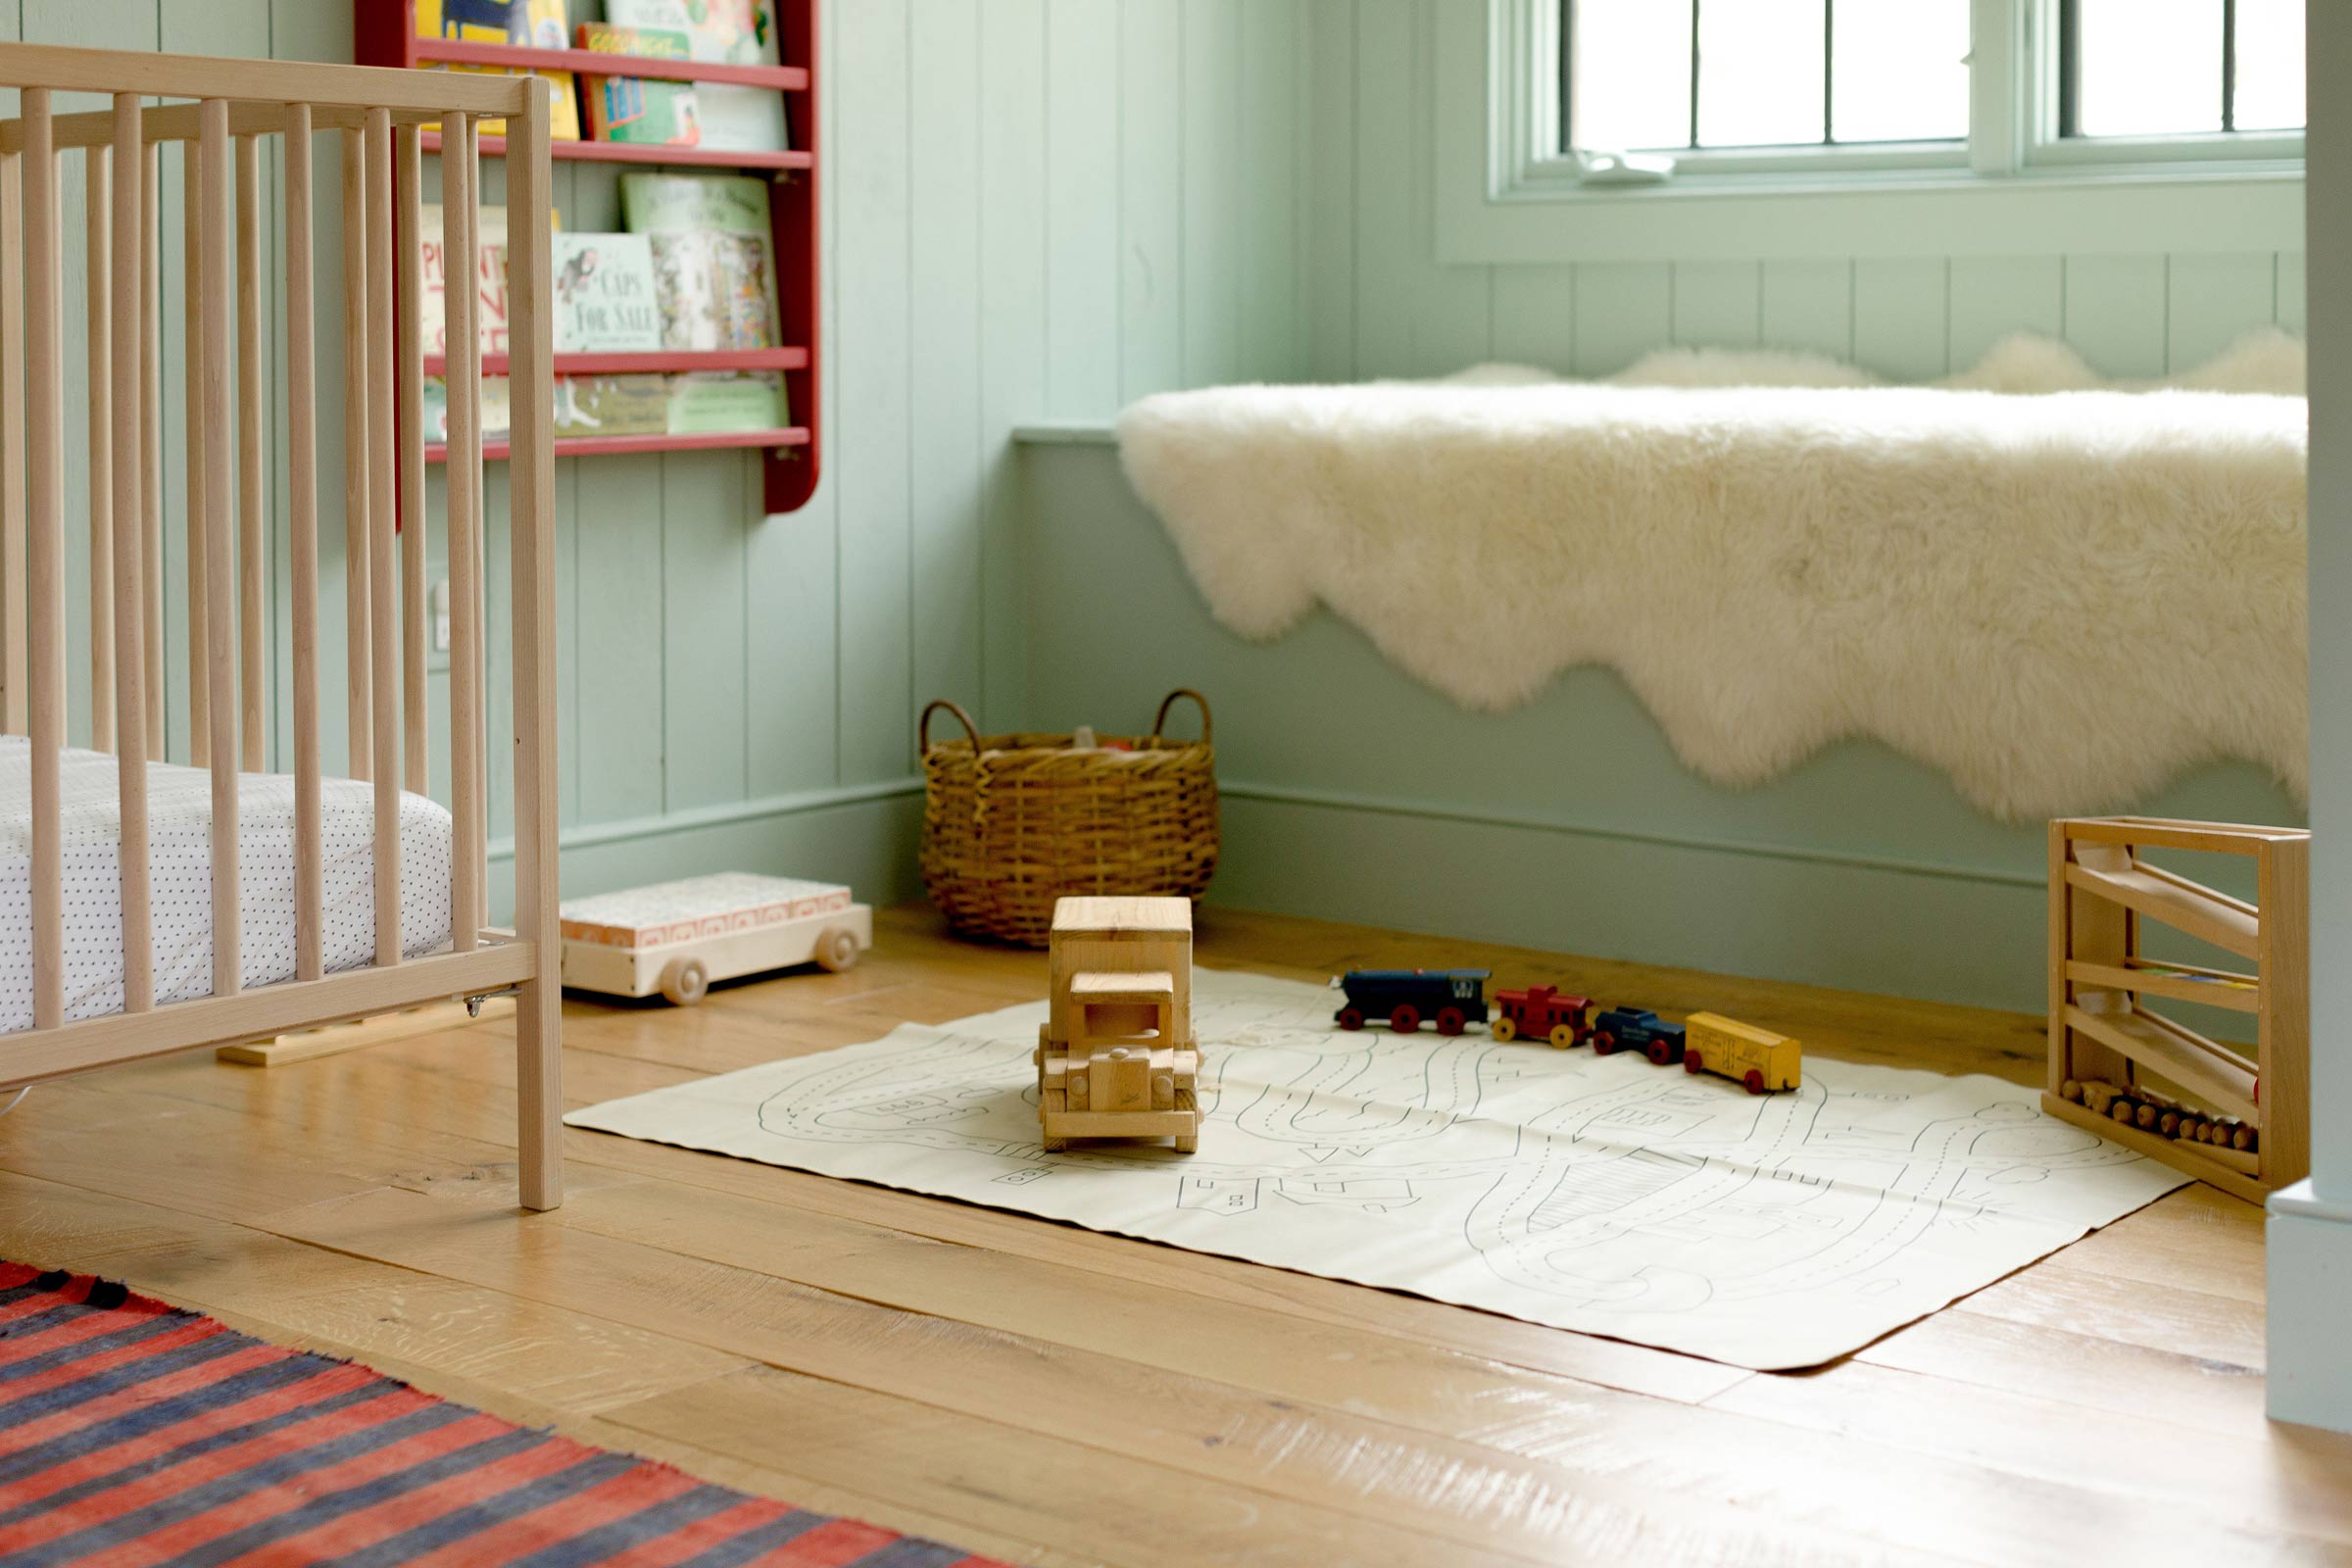 A dreamy nursery with mint green walls and wooden toys on the floor. 